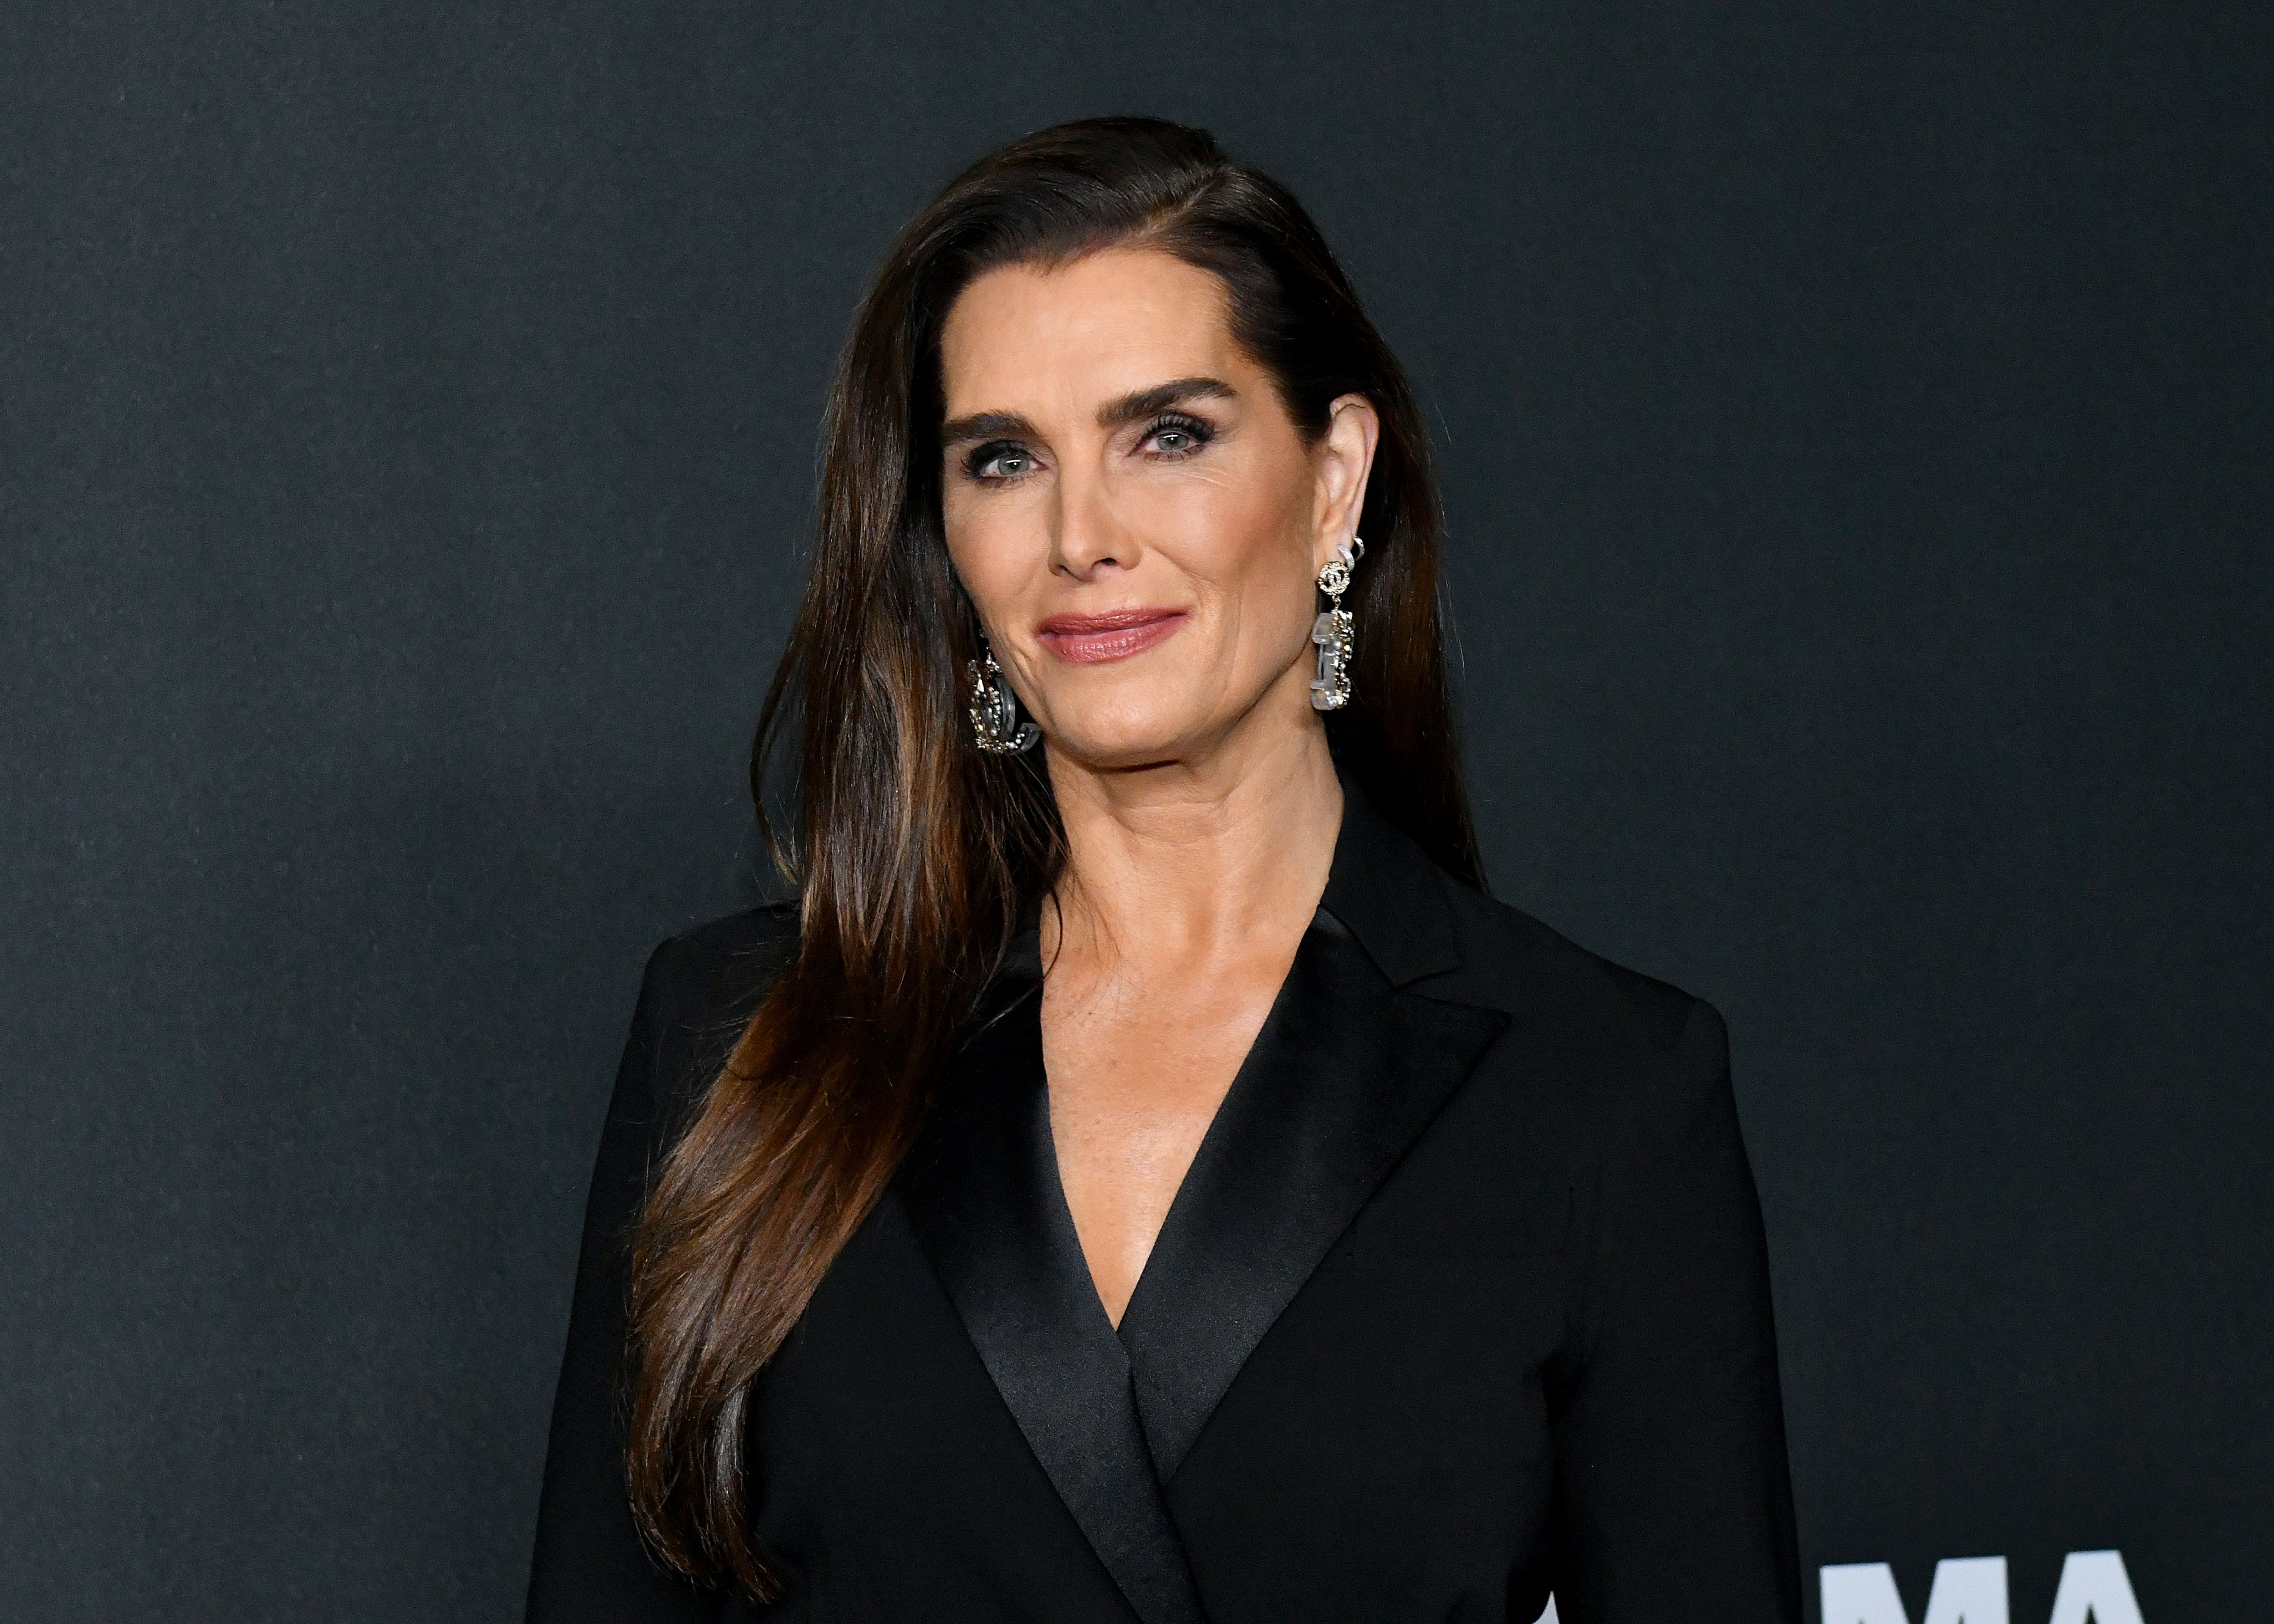 Brooke Shields at MoMA's Twelfth Annual Film Benefit Presented By CHANEL on November 12, 2019 | Photo: Getty Images